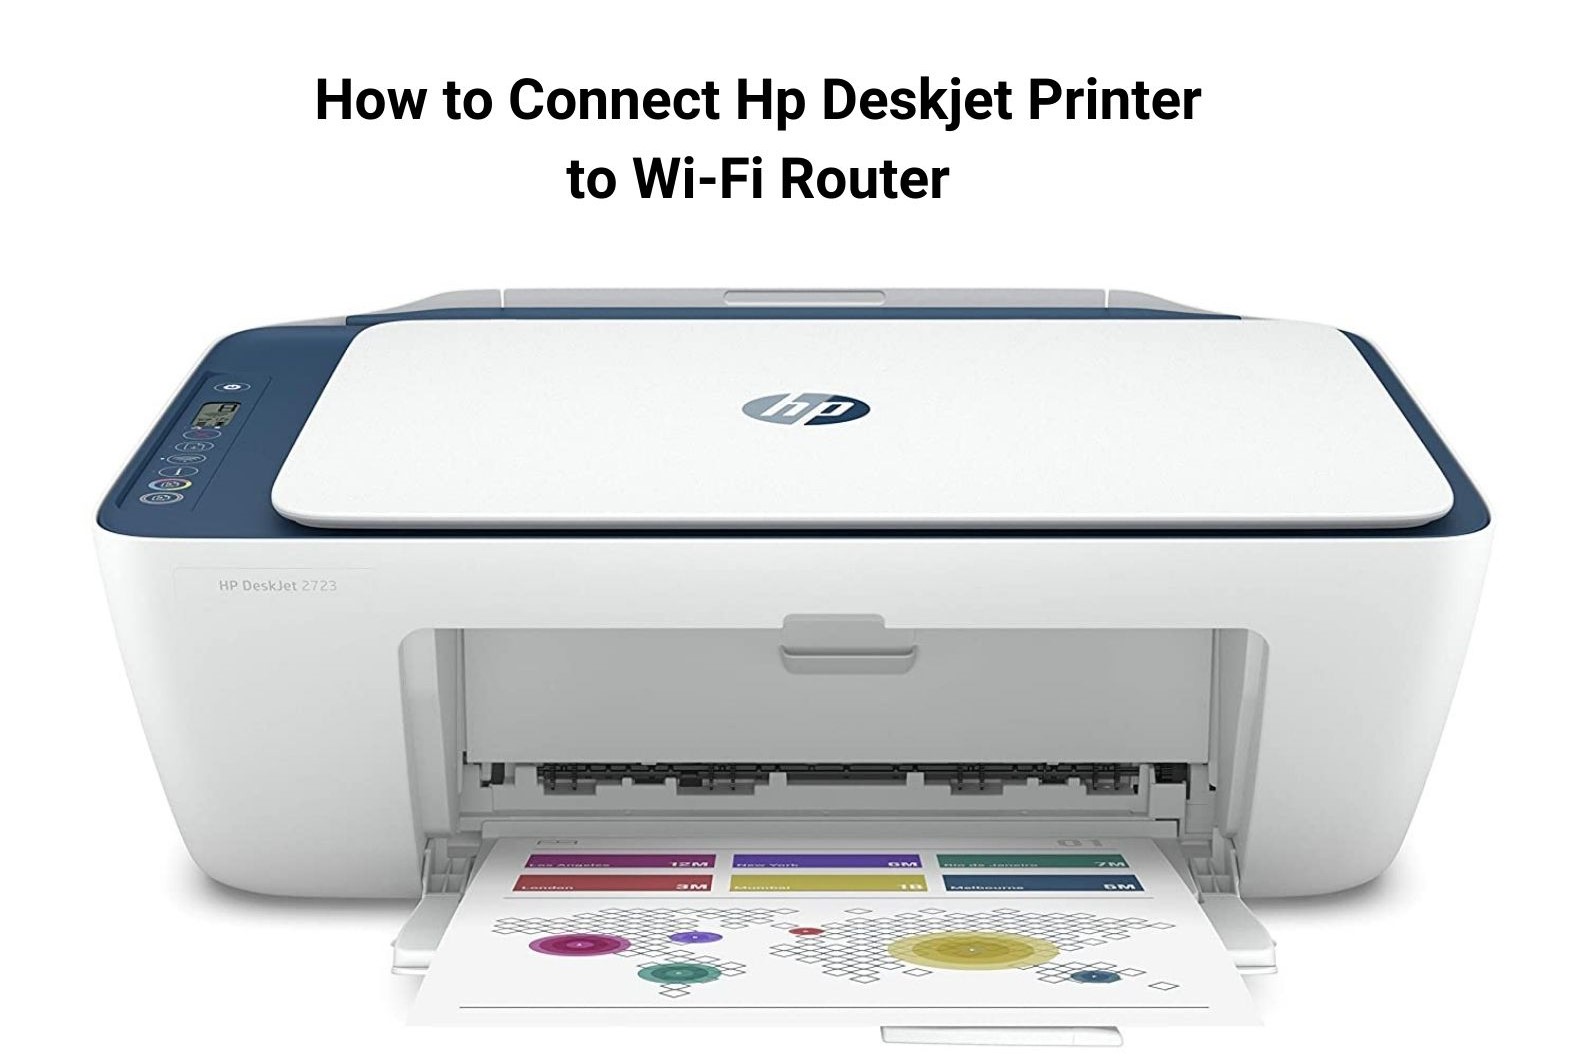 How to Connect Hp Deskjet Printer to Wi-Fi Router